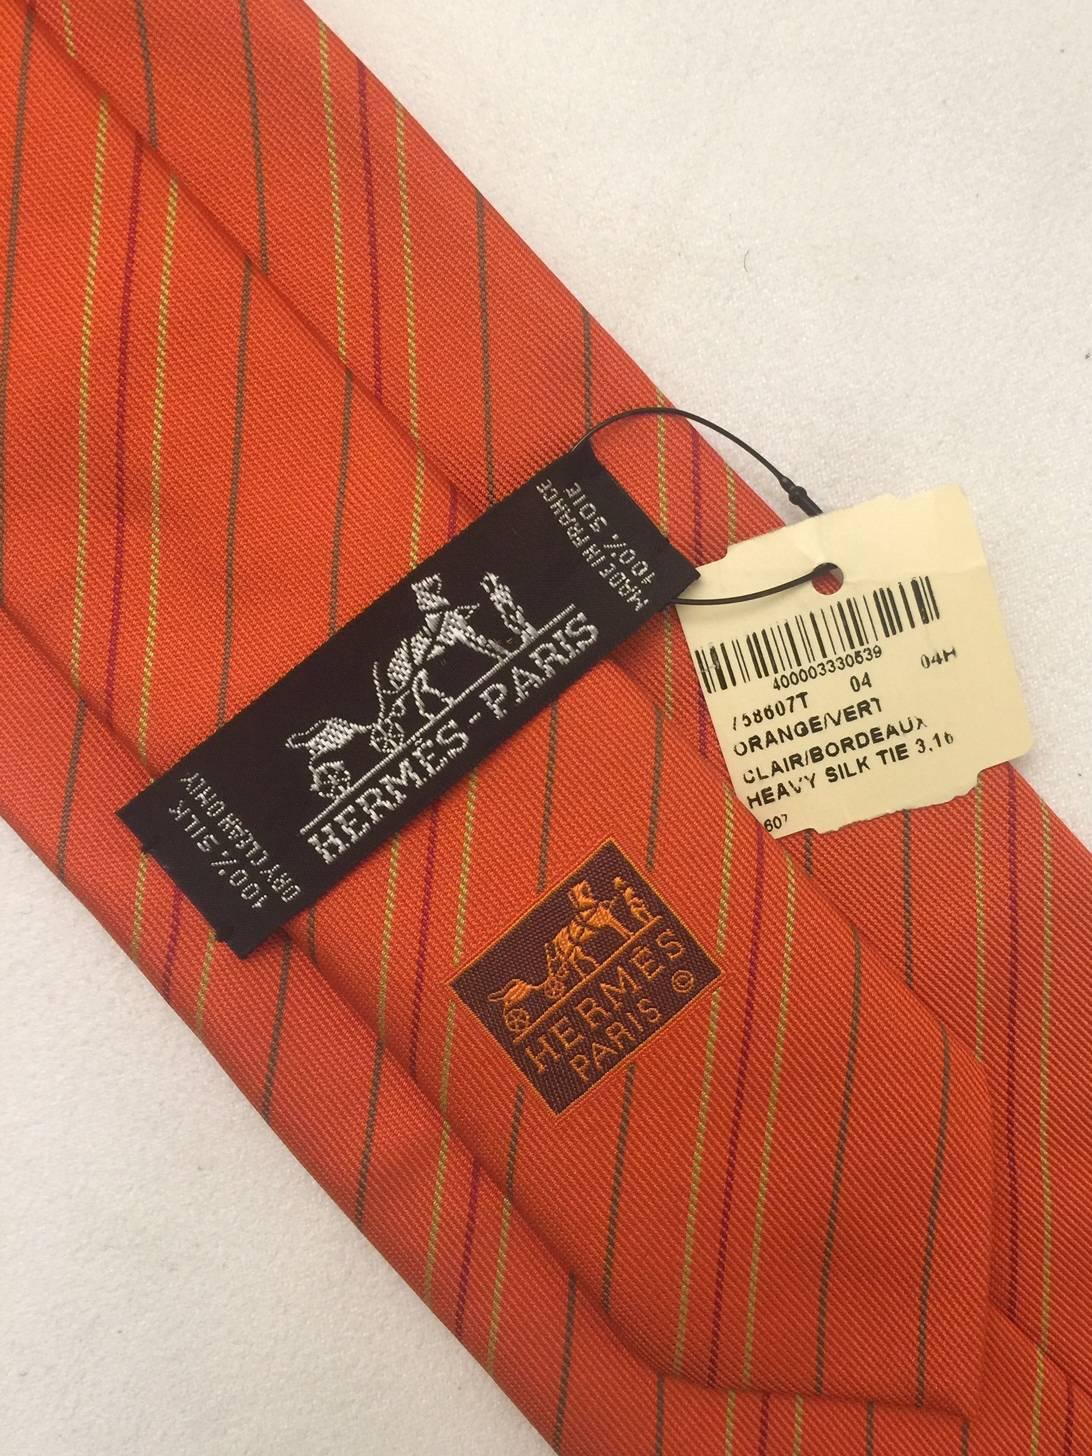 Cut a dashing figure in this classic tie by Hermes in classic Hermes verte orange cravat with a length of 58 inches, and width of  3.5 inches. Vintage 1980's. New with original hang tag.